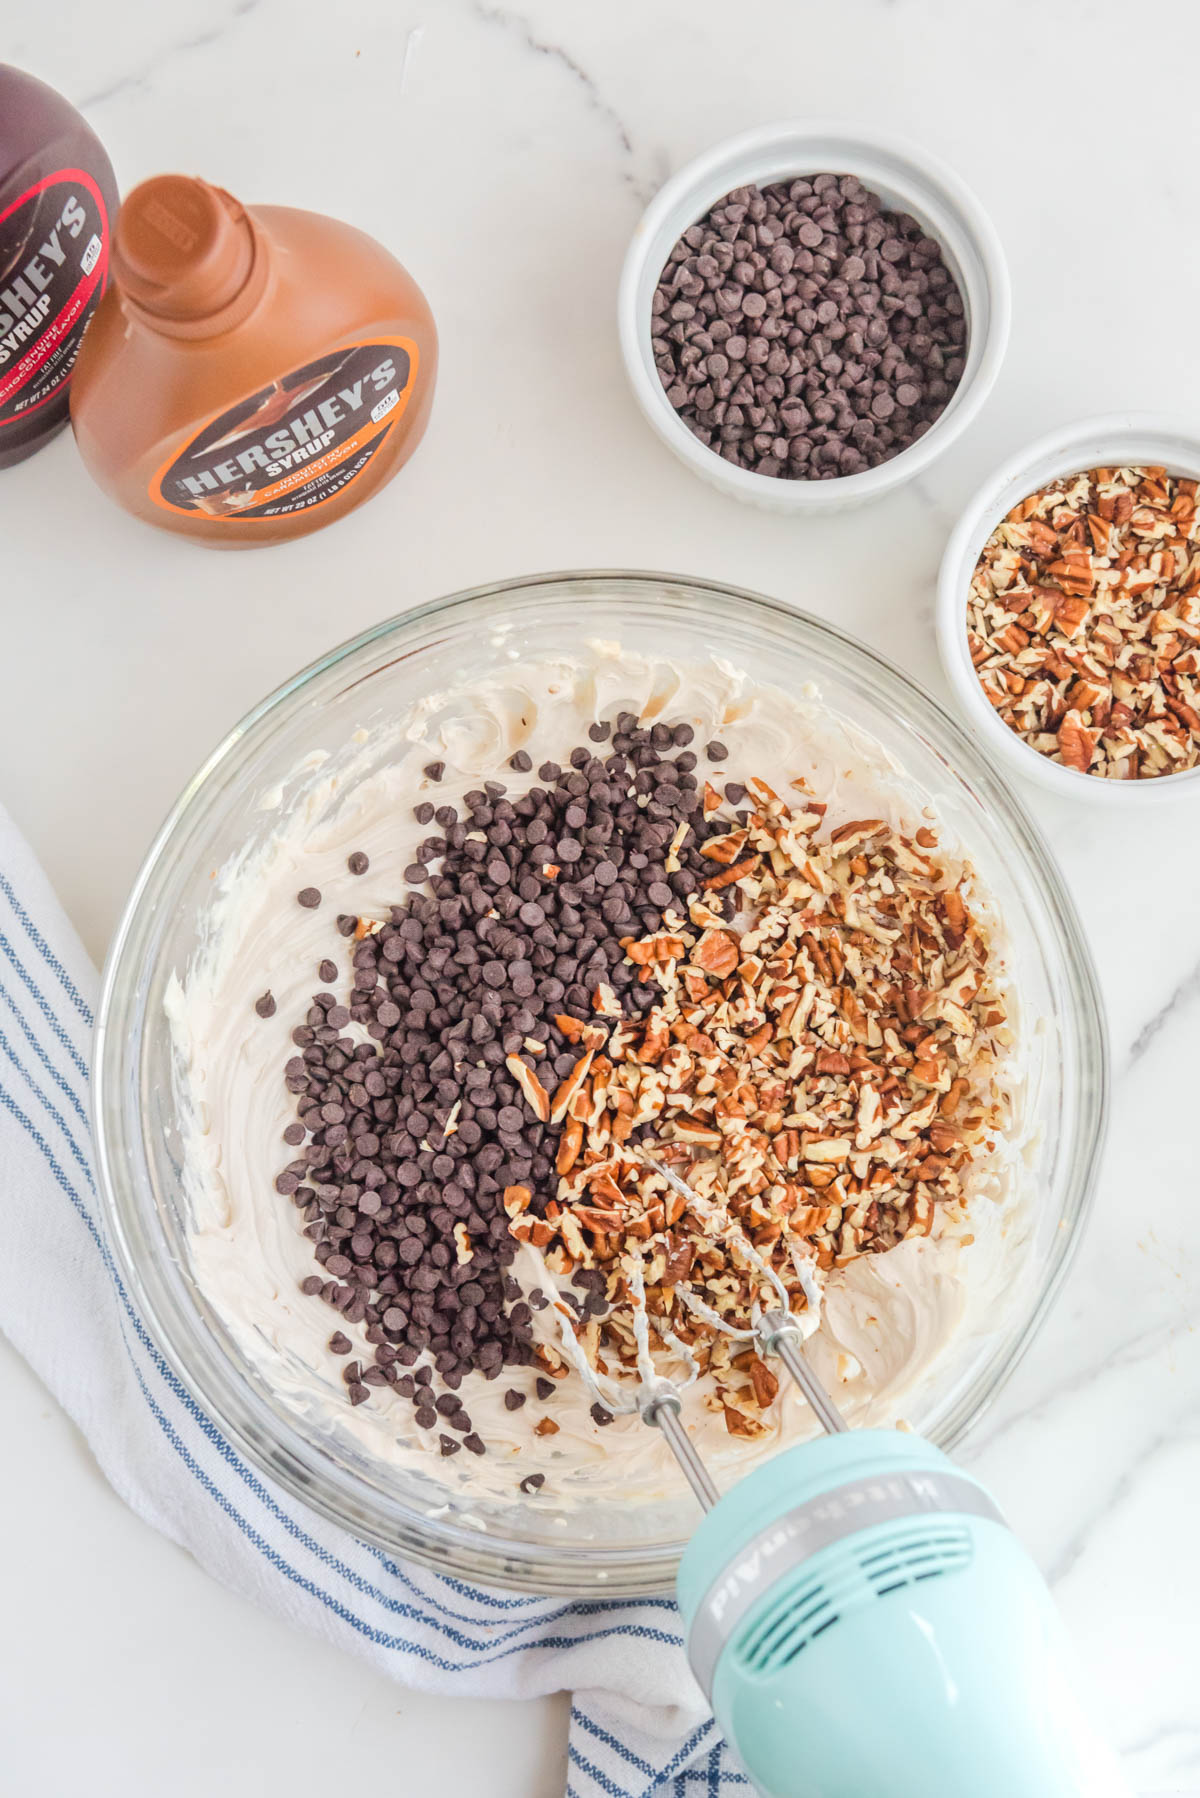 Cream cheese mixture in a bowl with nuts and chocolate chips.